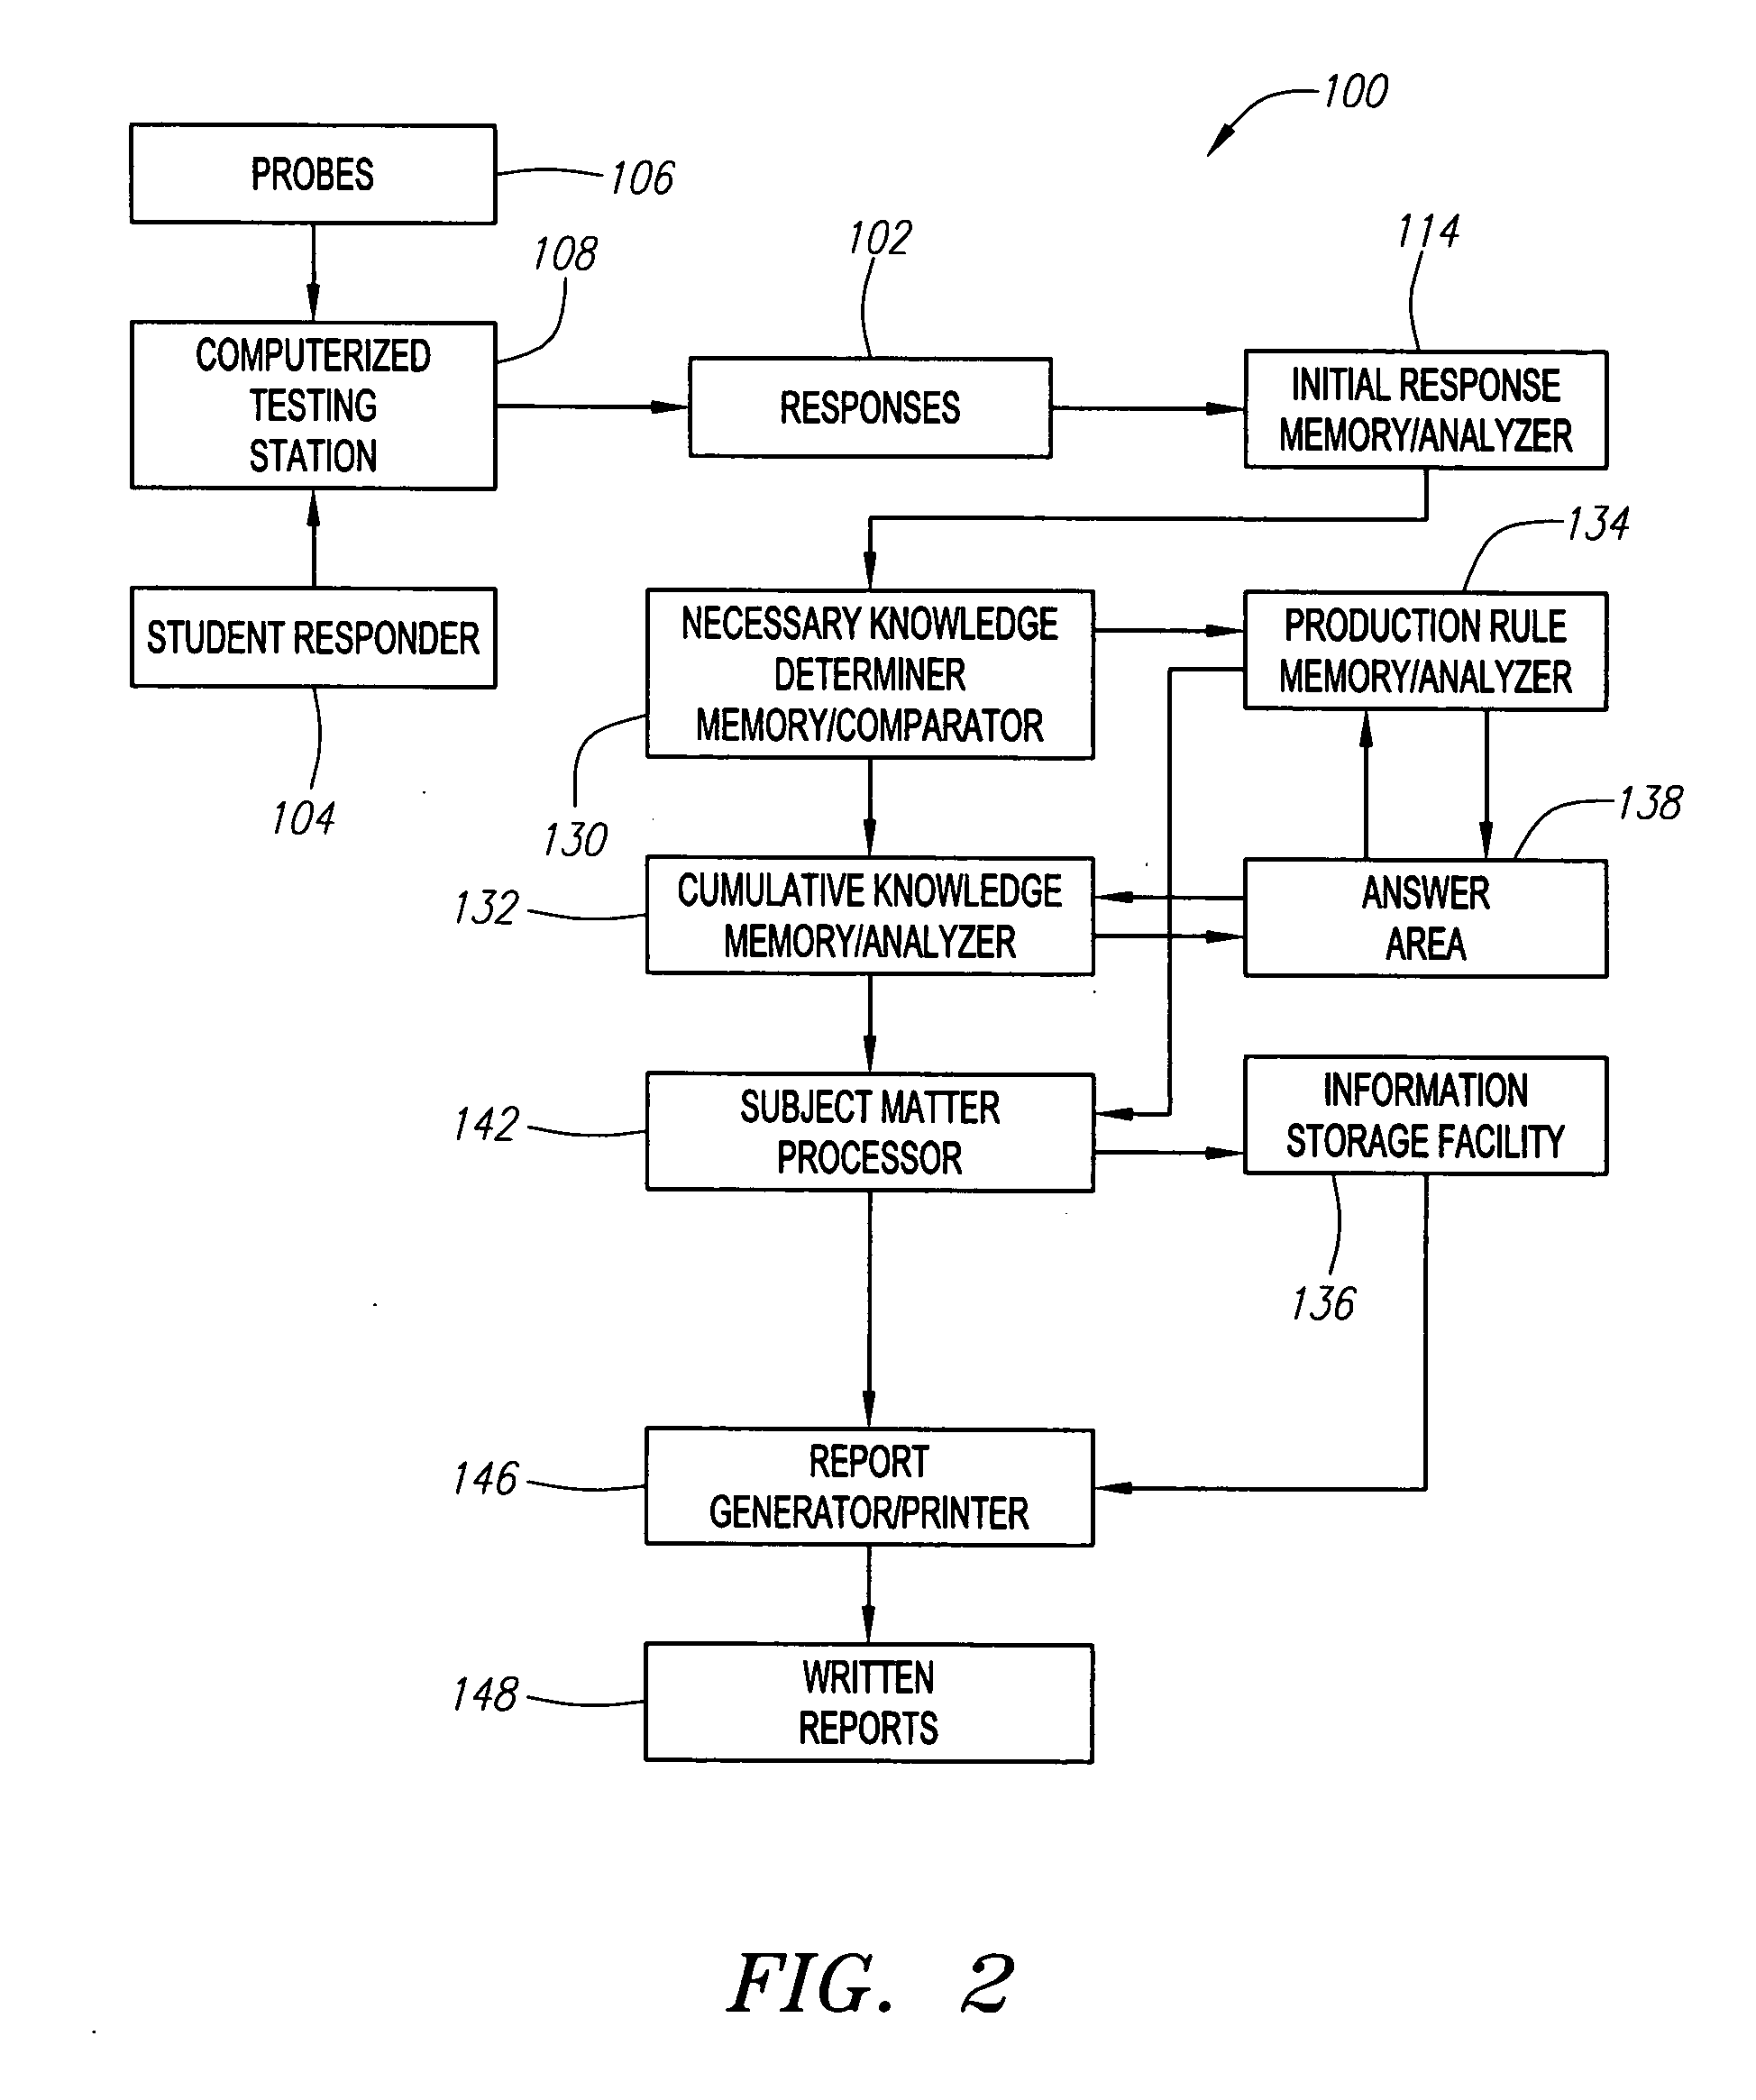 System and method for diagnosing deficiencies and assessing knowledge in test responses